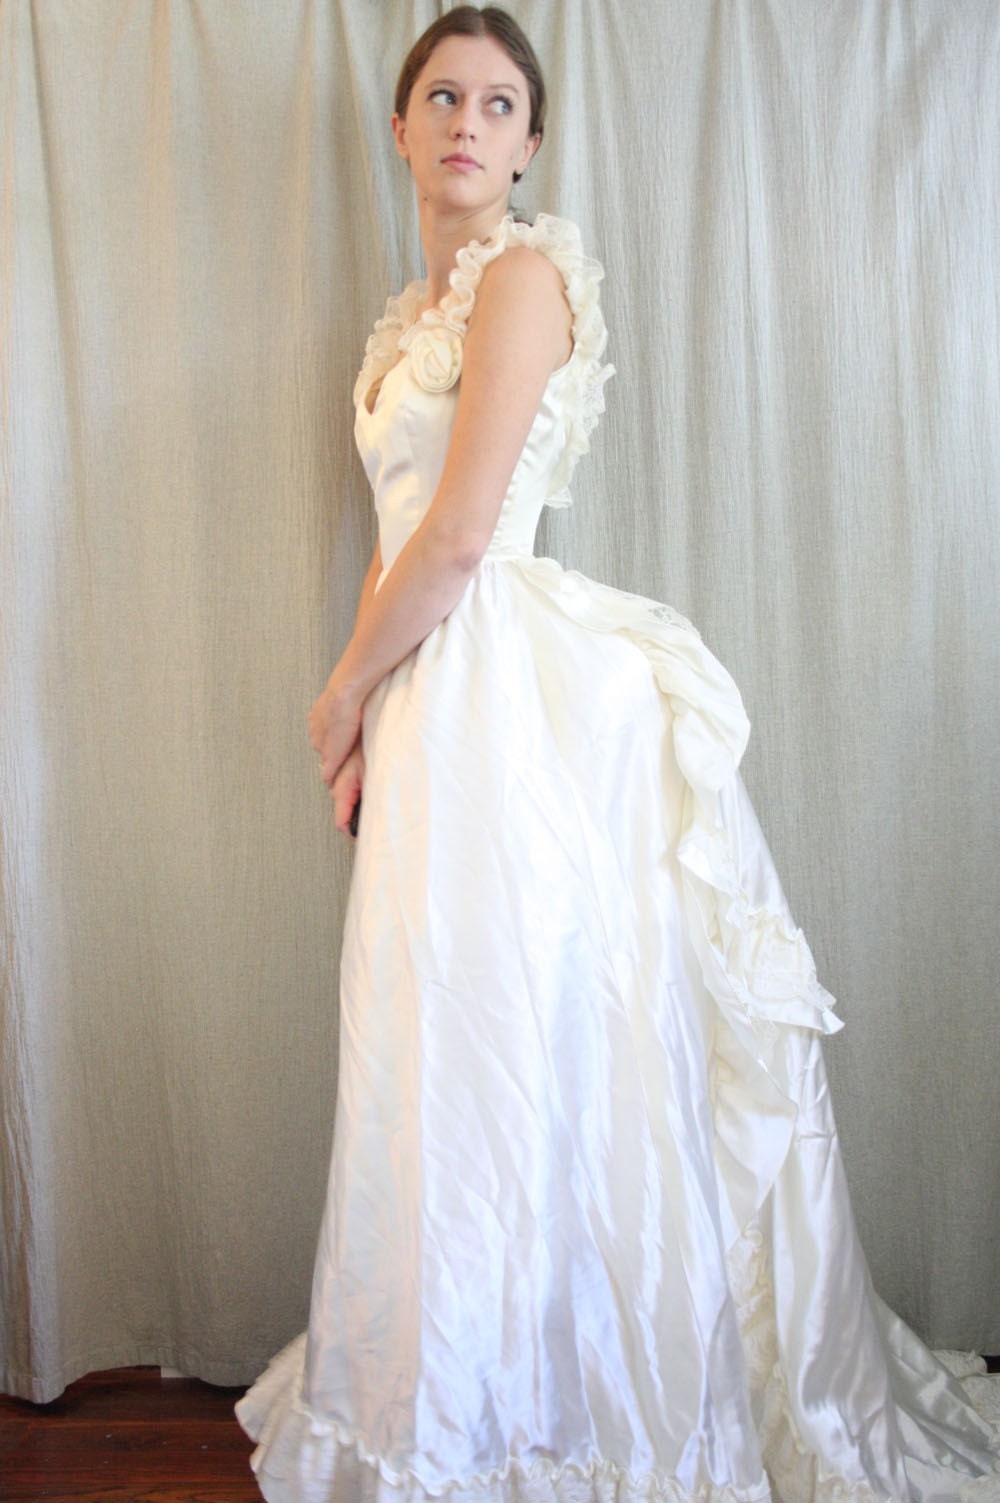 An image of a wedding dress with an over bustle.